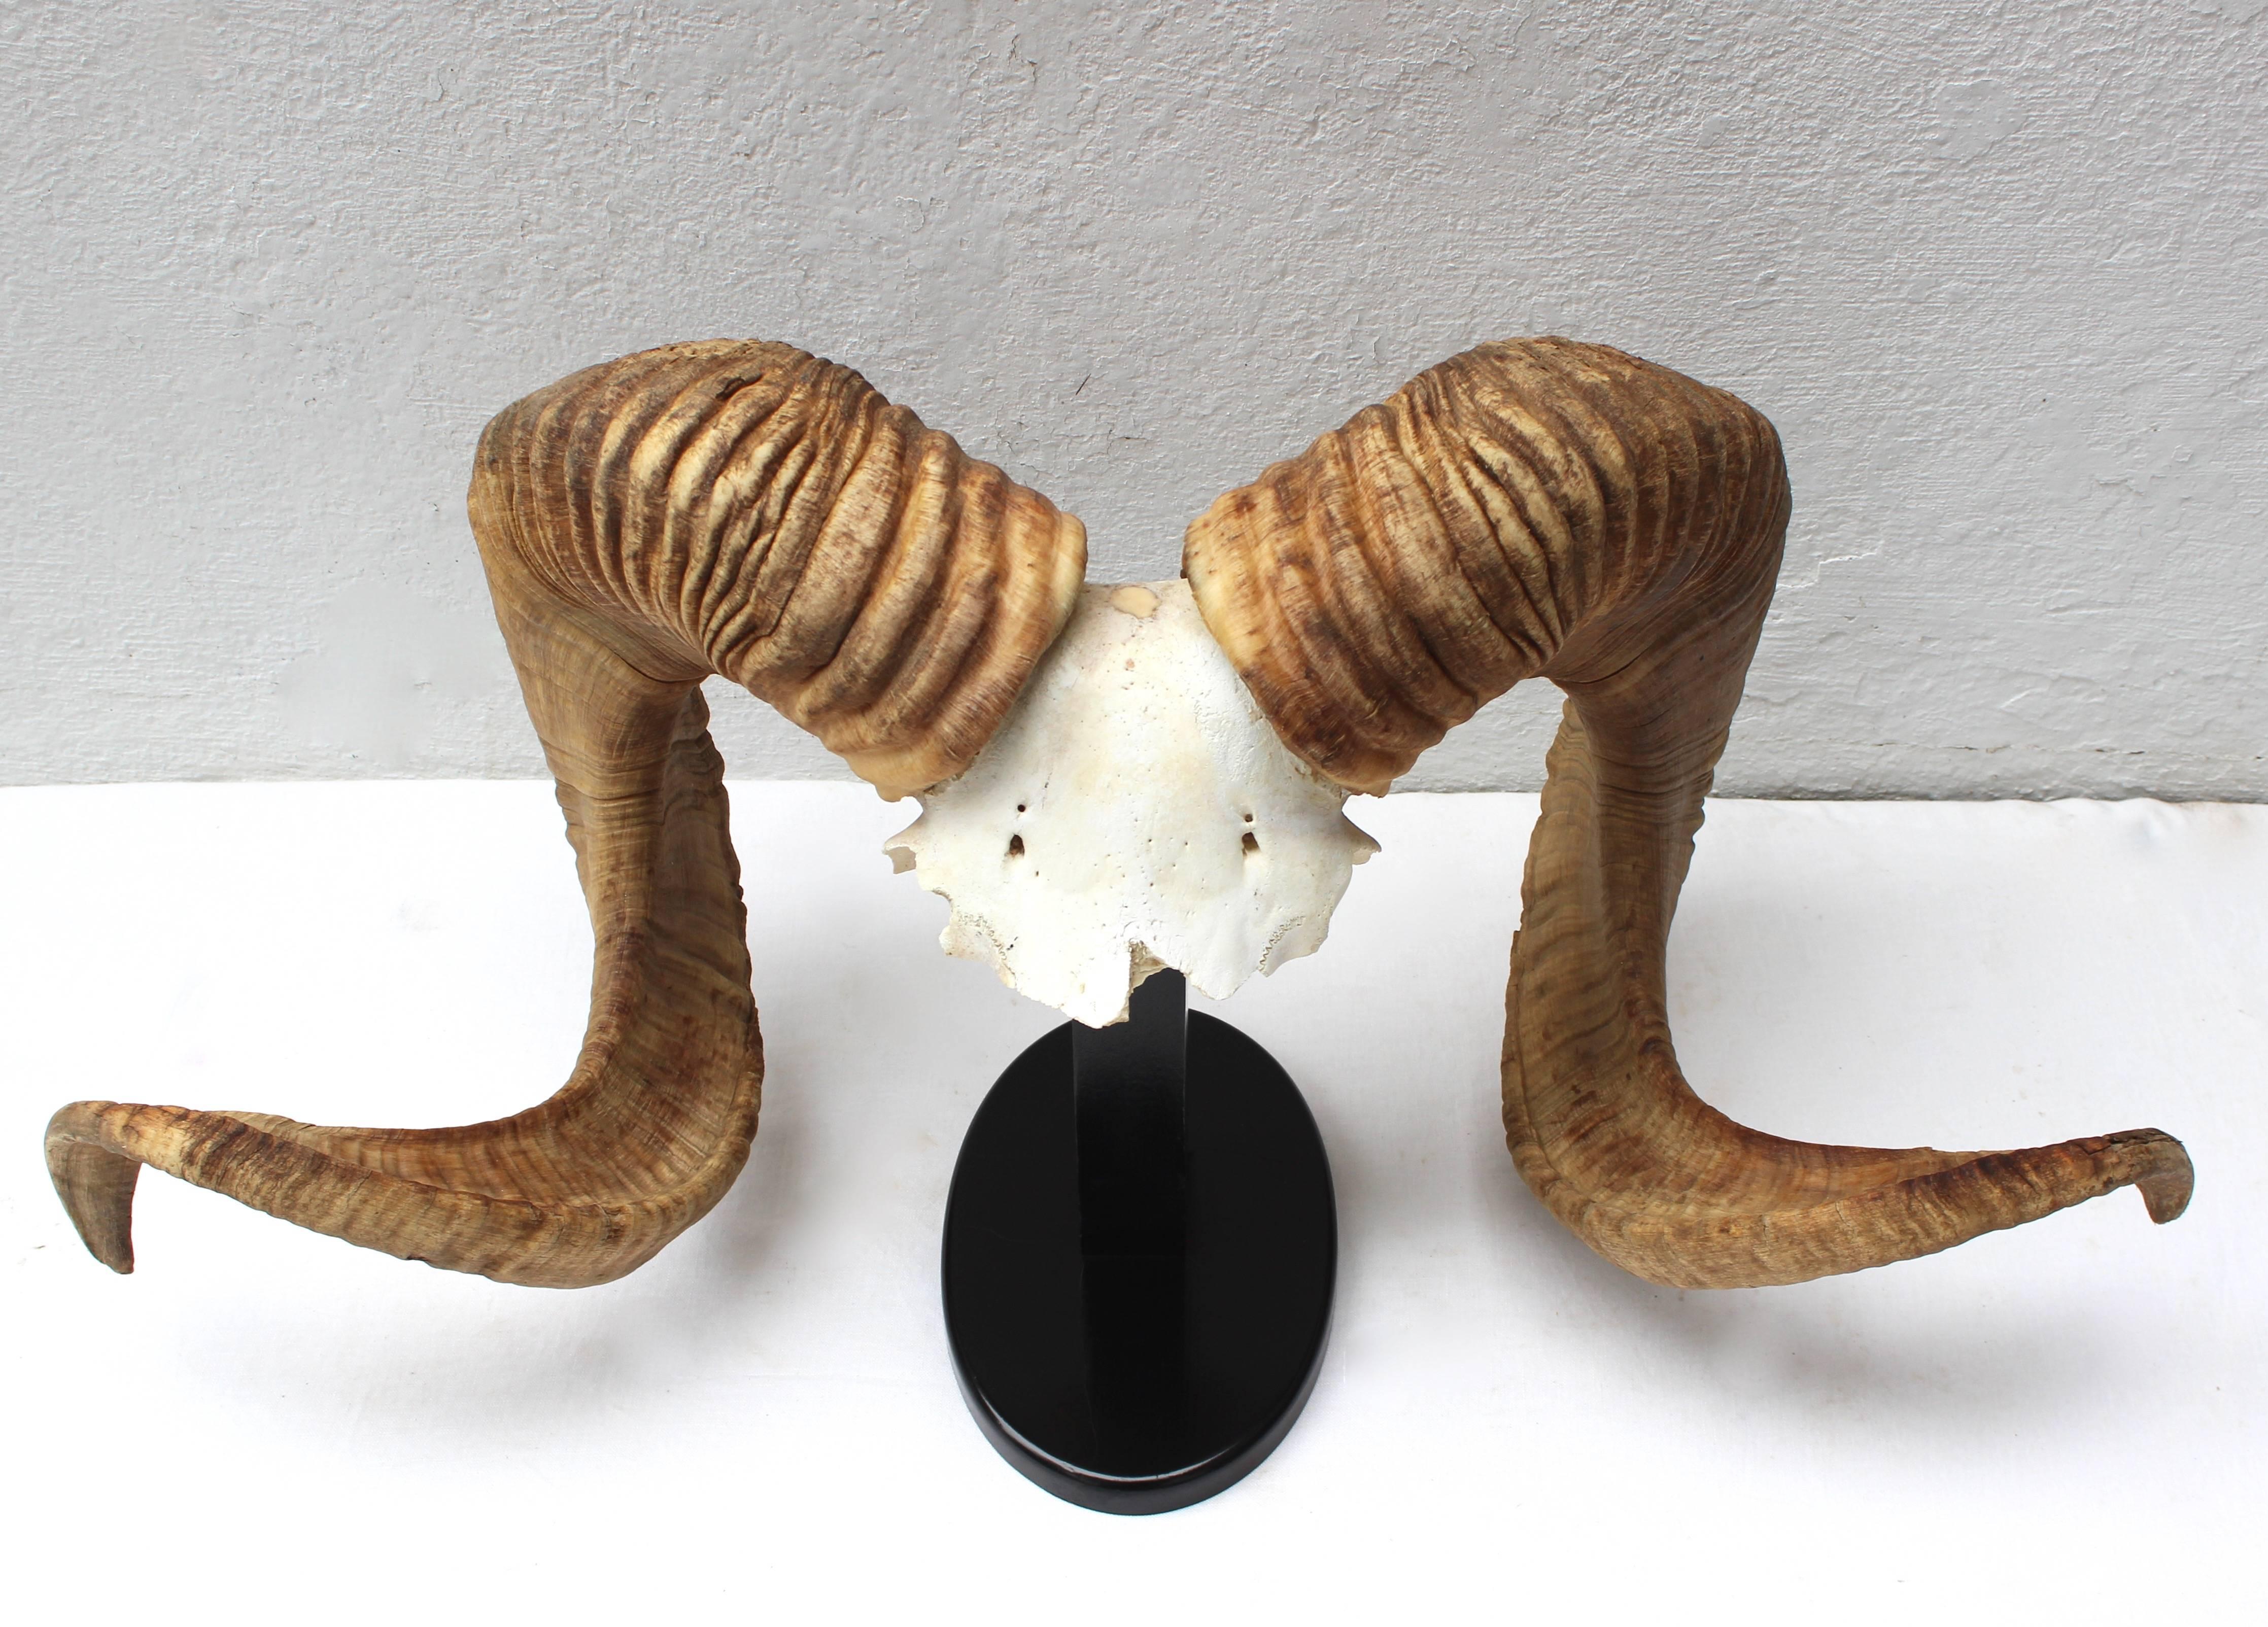 Large and impressive pair of mounted Ram Horns on a wood base. Can be used as a freestanding sculpture or hung on the wall. Span across the horns of 36".